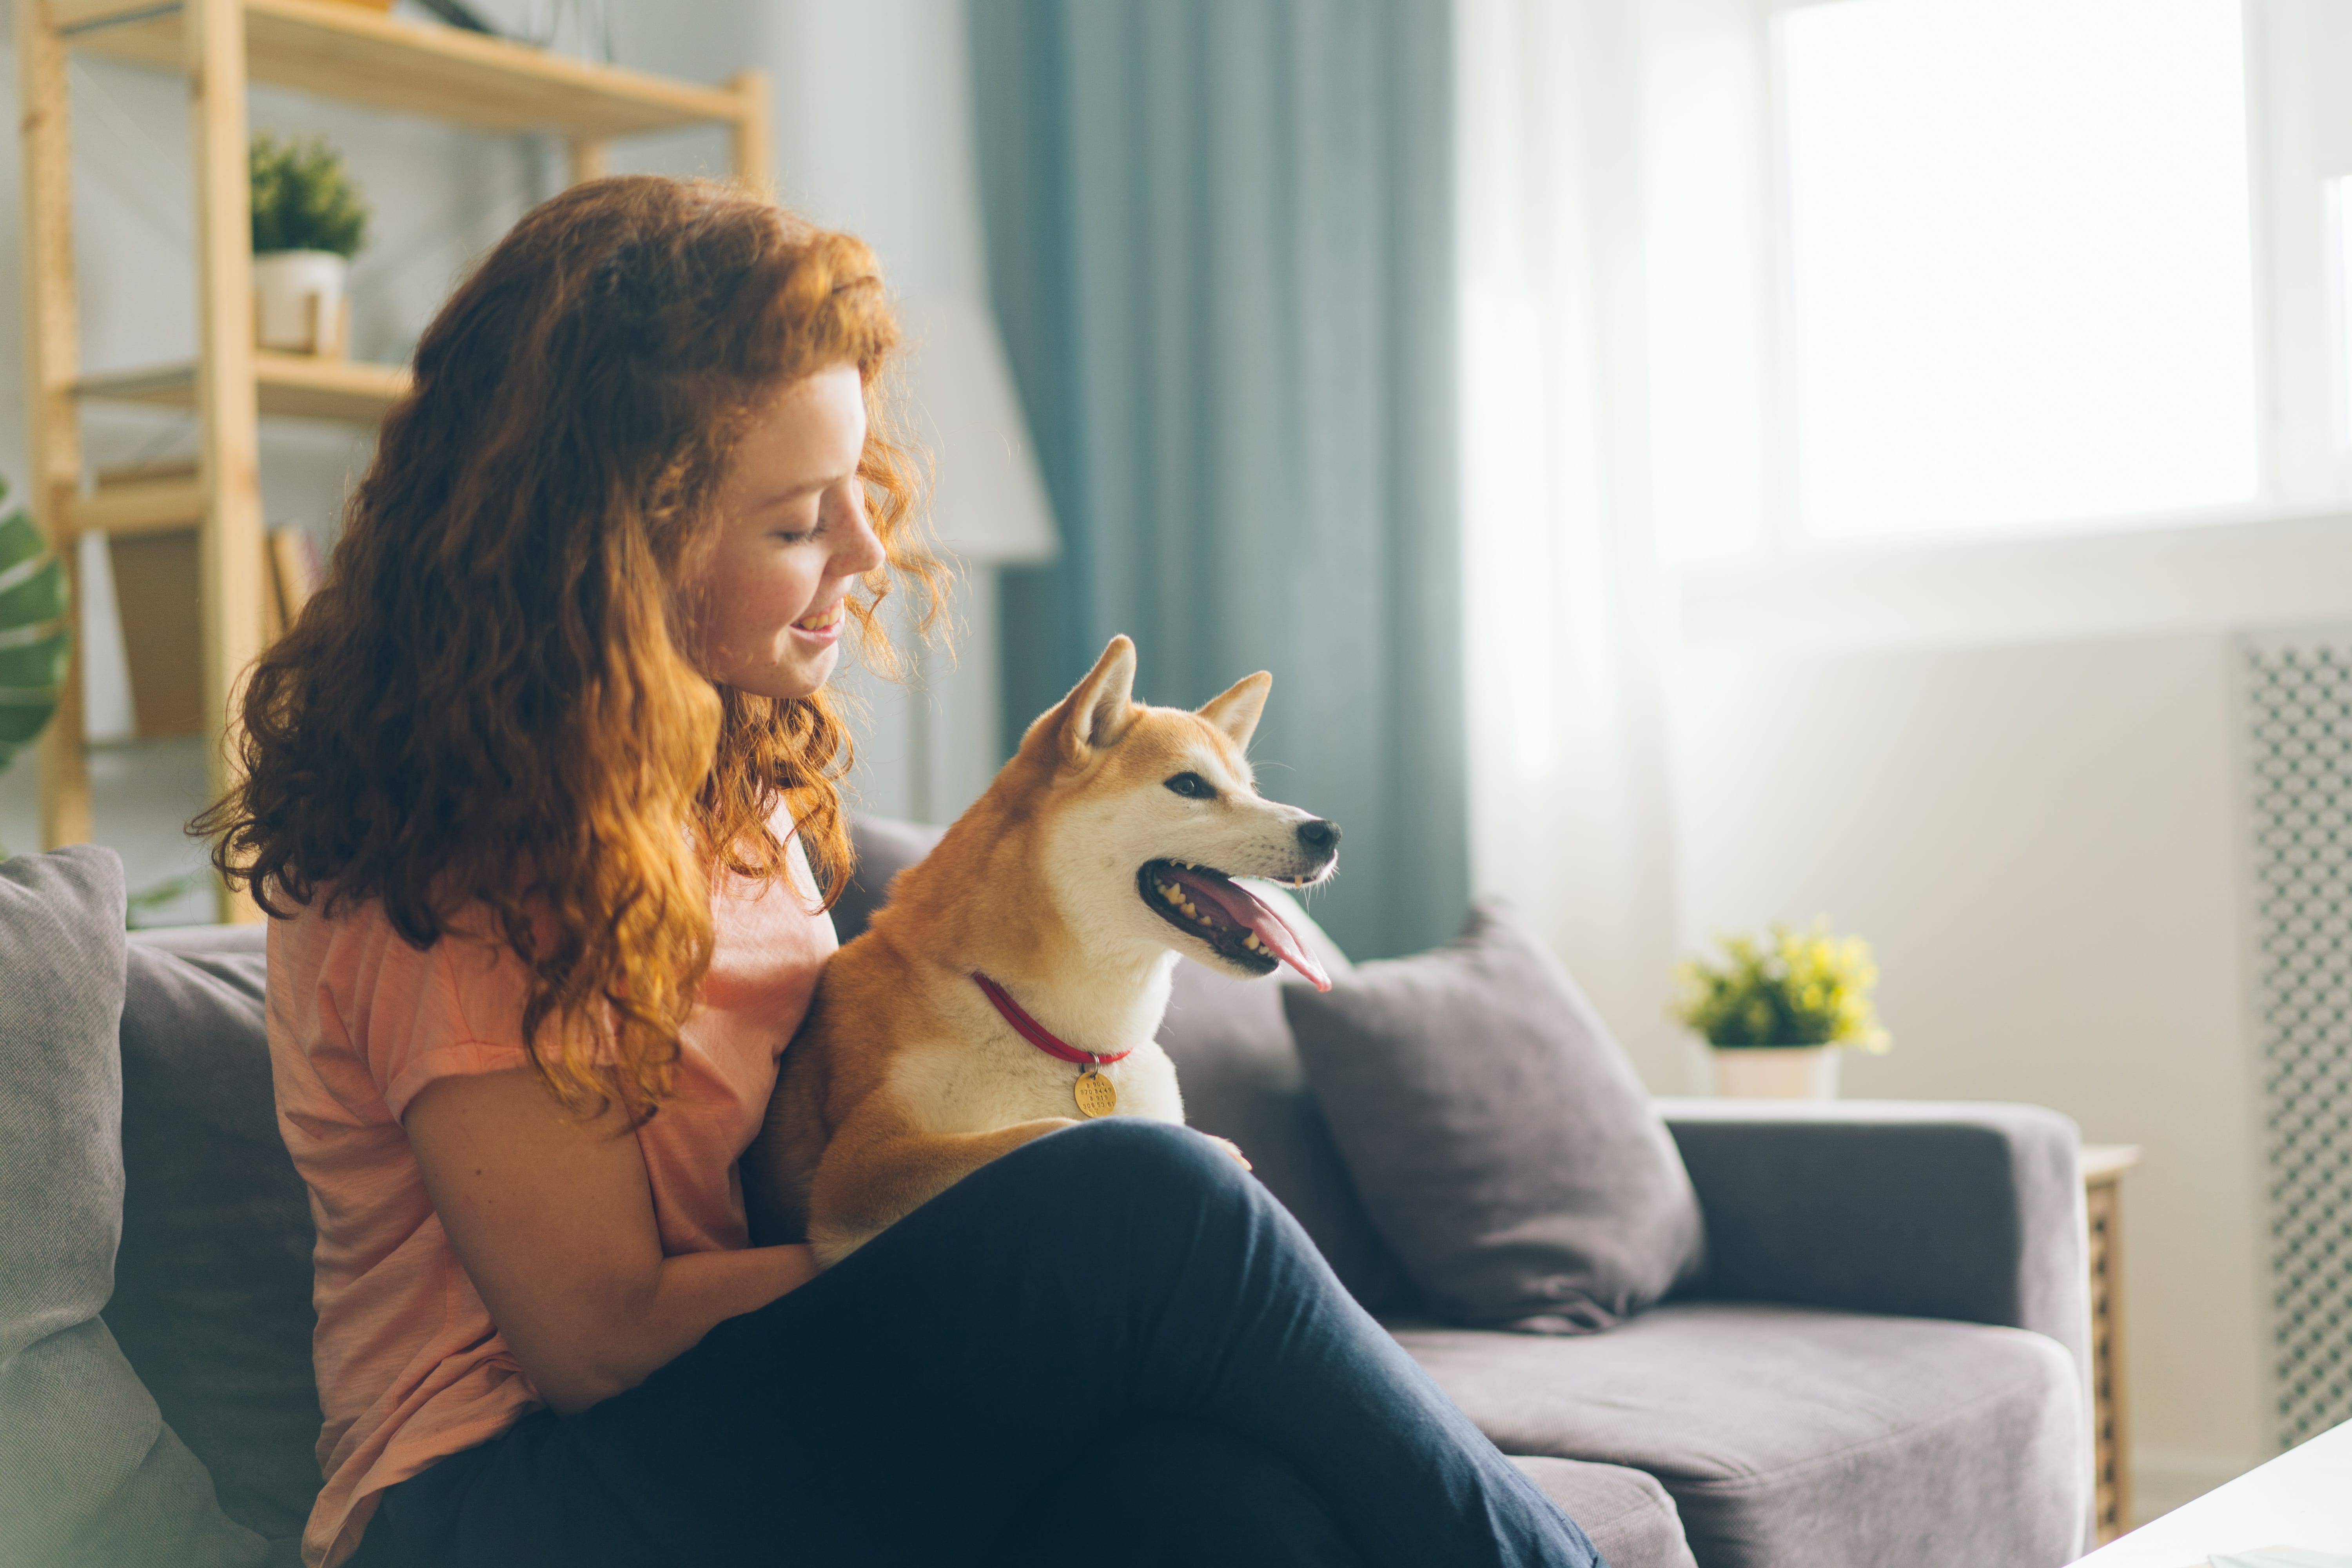 blog image of a woman with her dog in an apartment; blog title: Making Your Apartment Pet Friendly